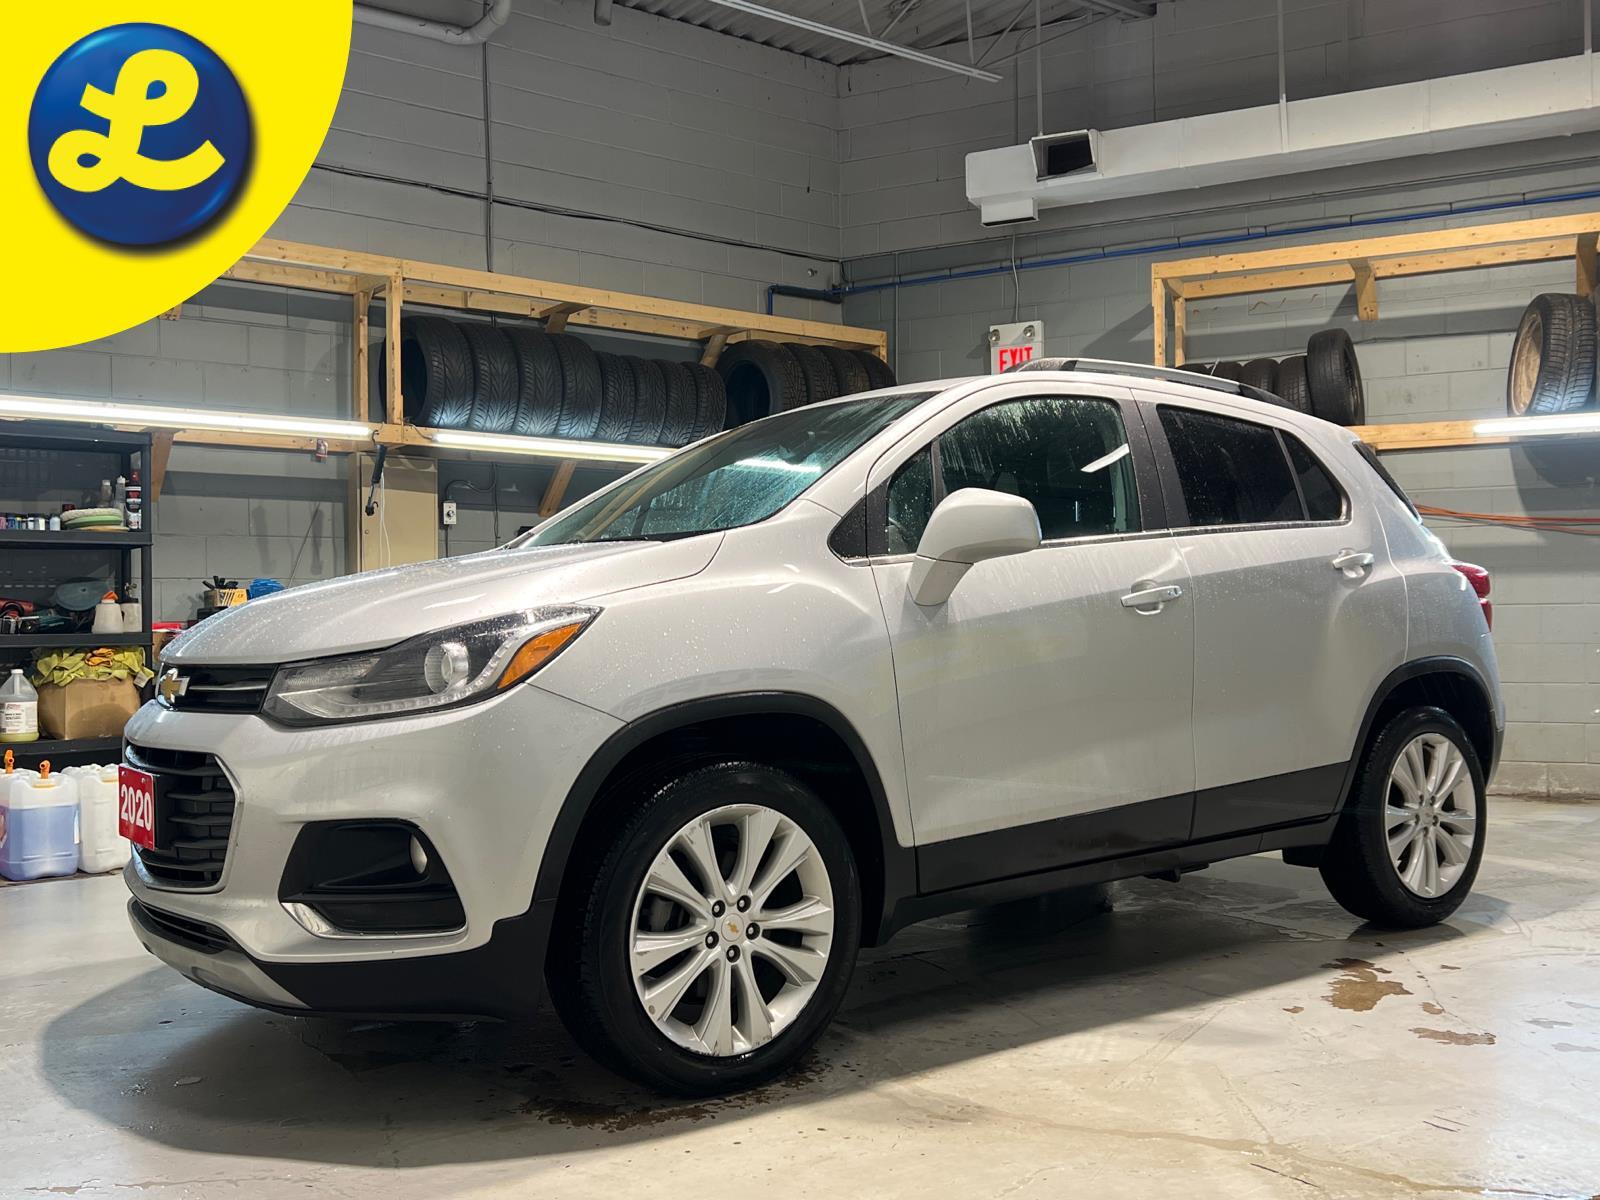 2020 Chevrolet Trax Premier AWD  Sunroof  Heated Leather Seats  Bose A